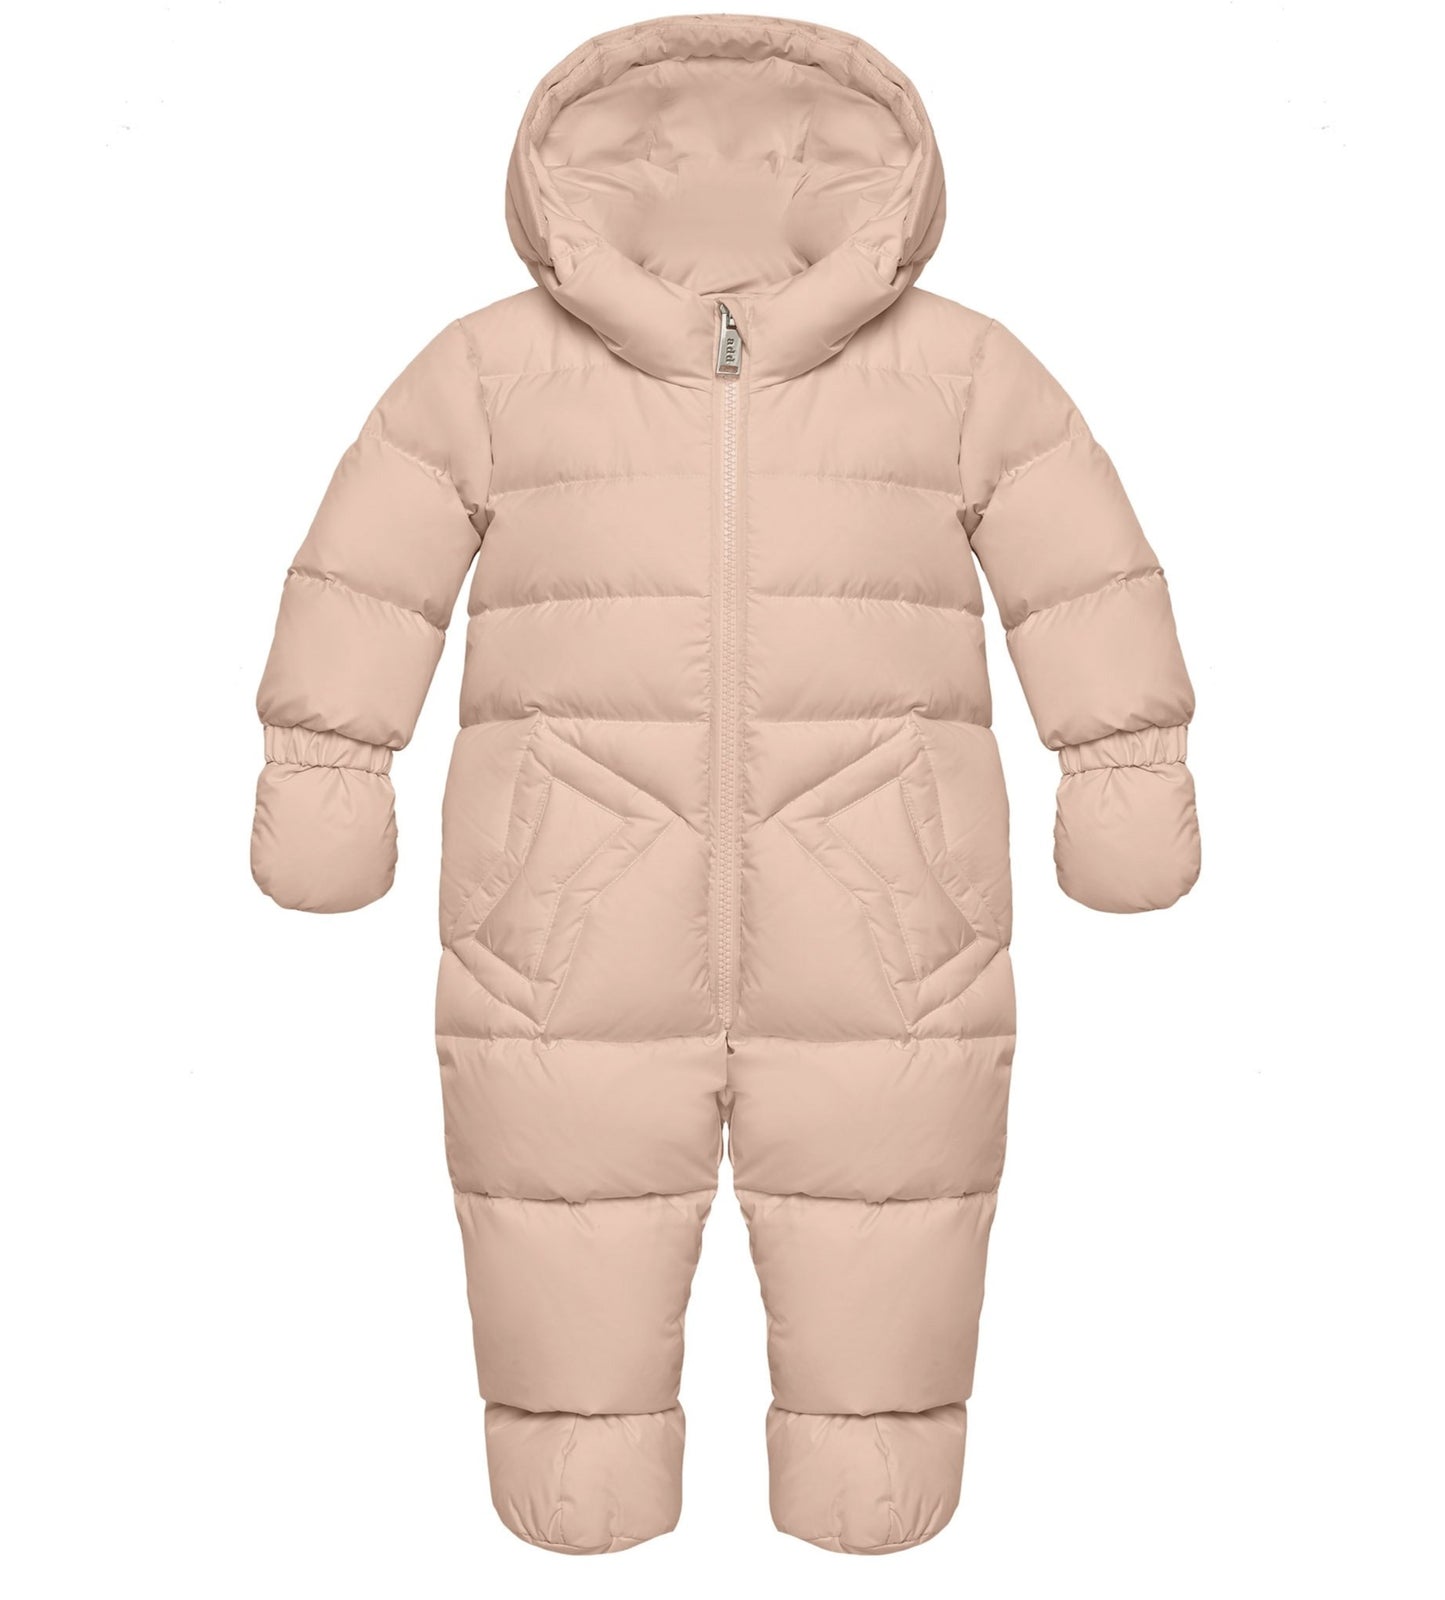 Add Outerwear Baby Snowsuit with Fur